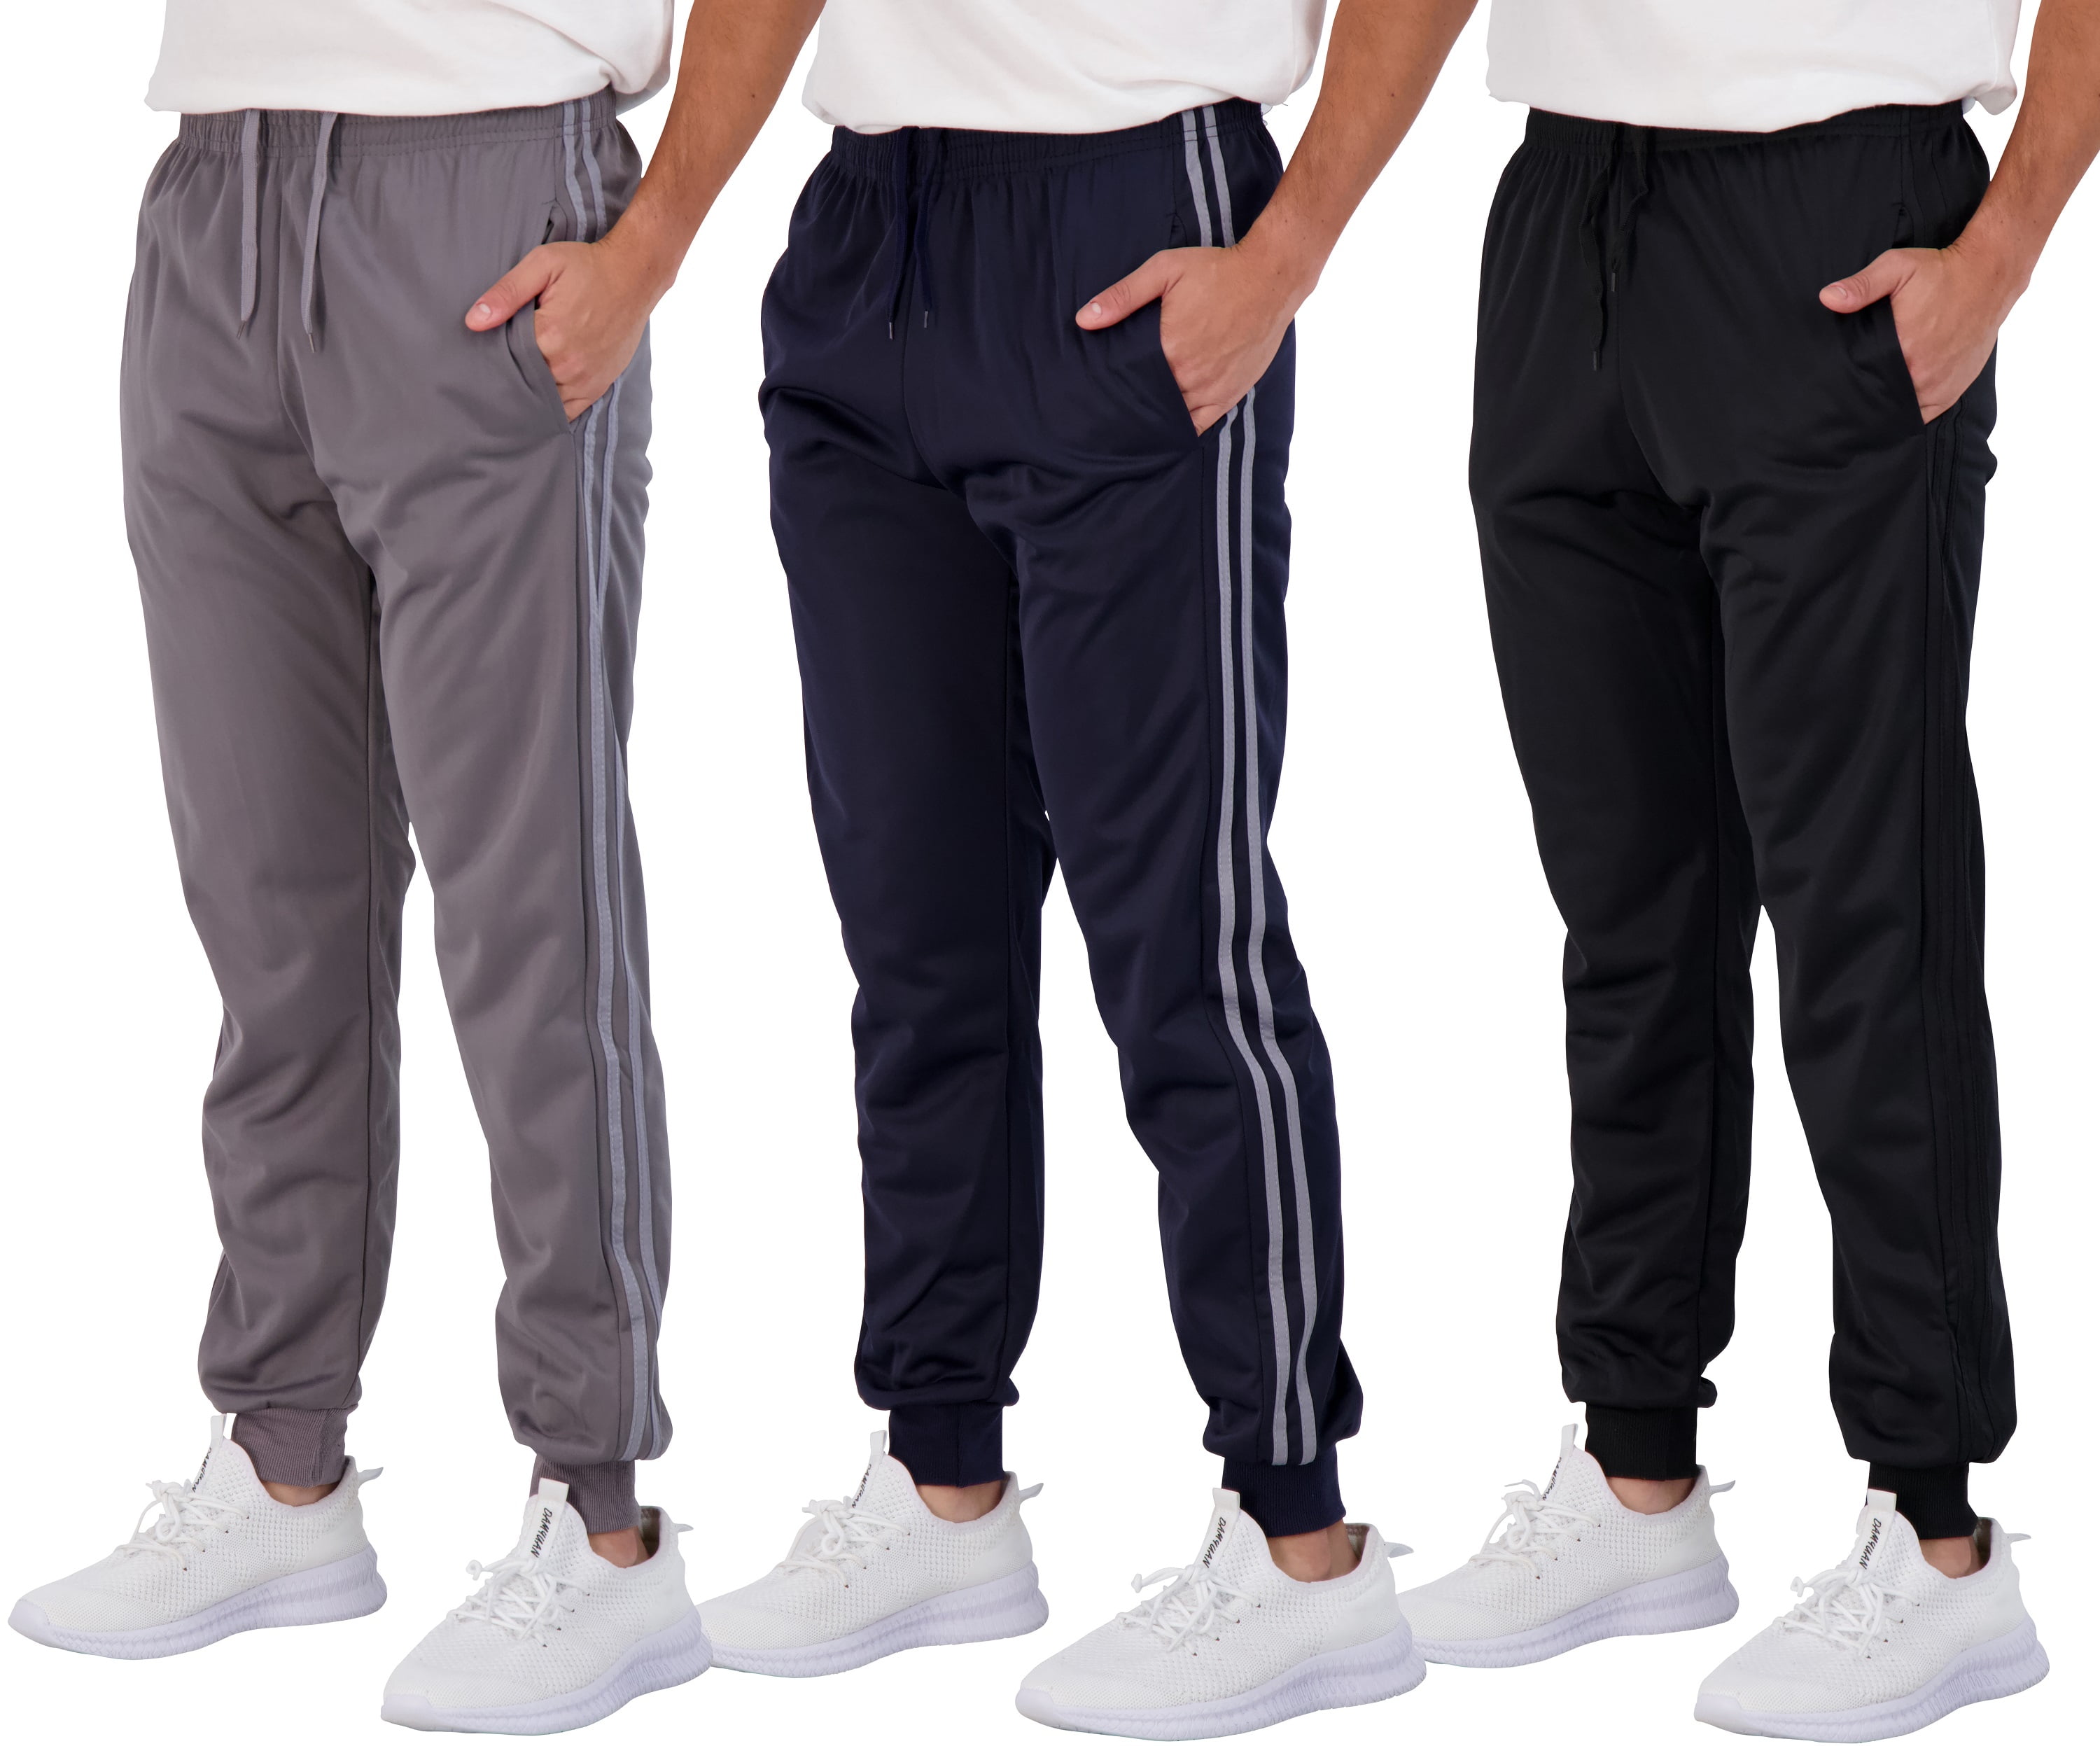 Real Essentials 3 Pack: Men's Tricot Active Athletic Casual Jogger ...